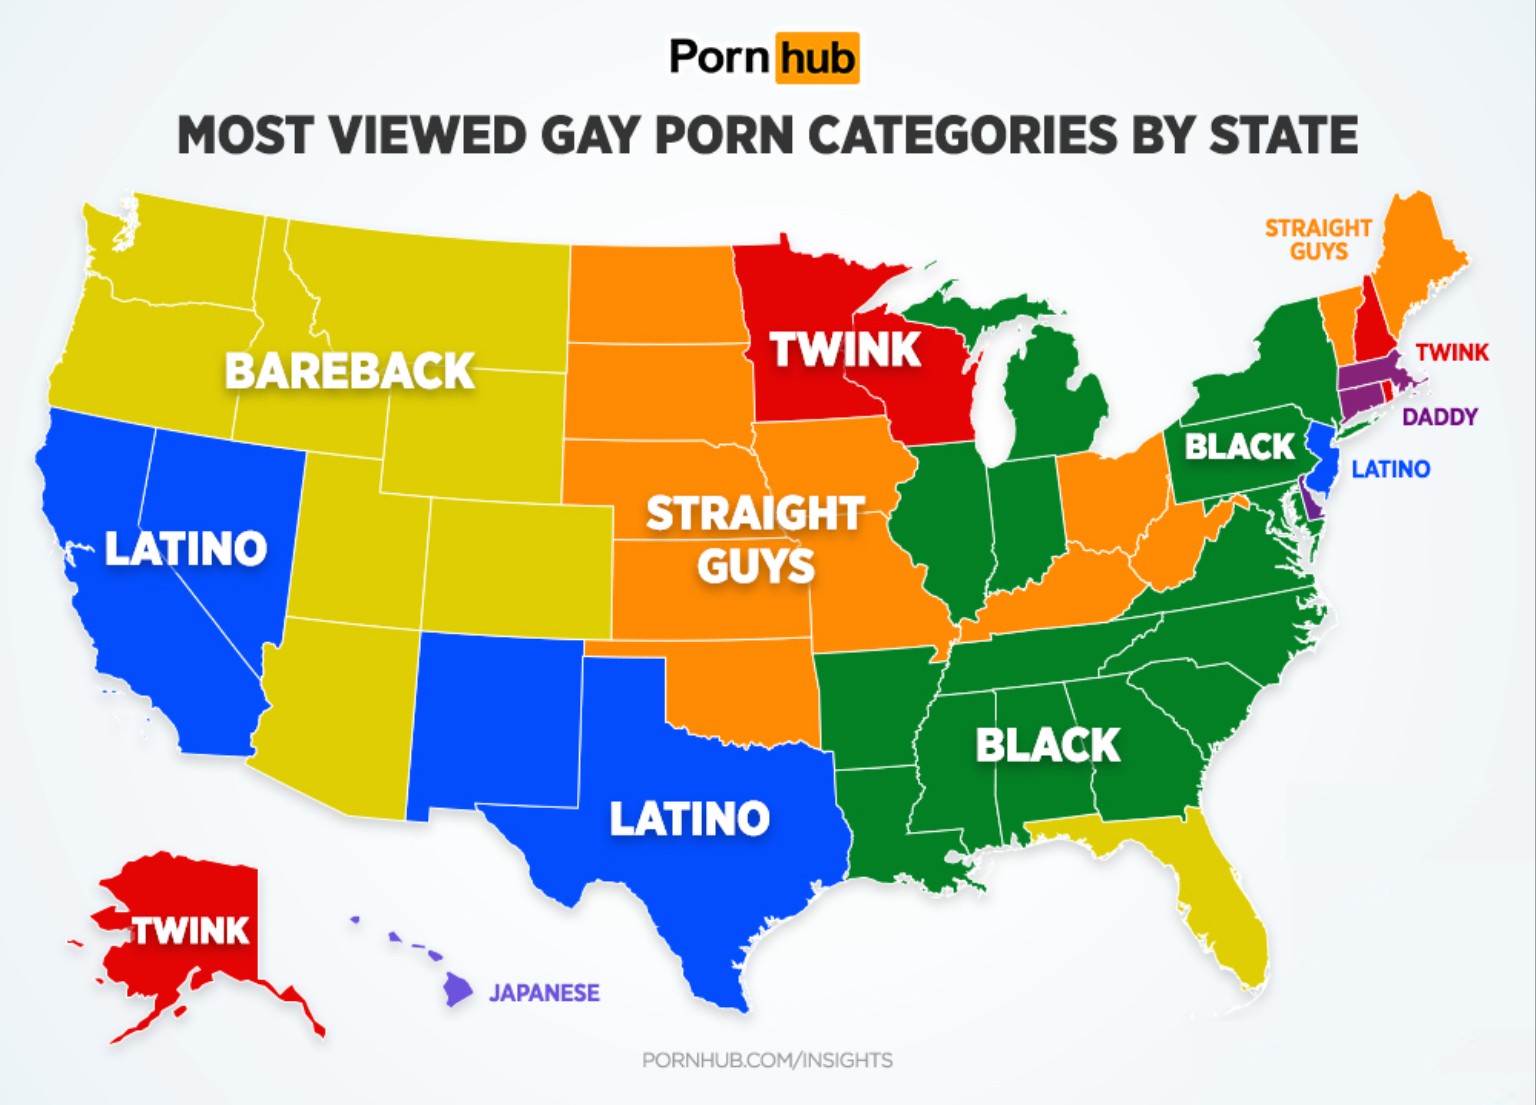 Most Viewed - Most viewed gay porn categories by state - The Bar (18+) - OneHallyu